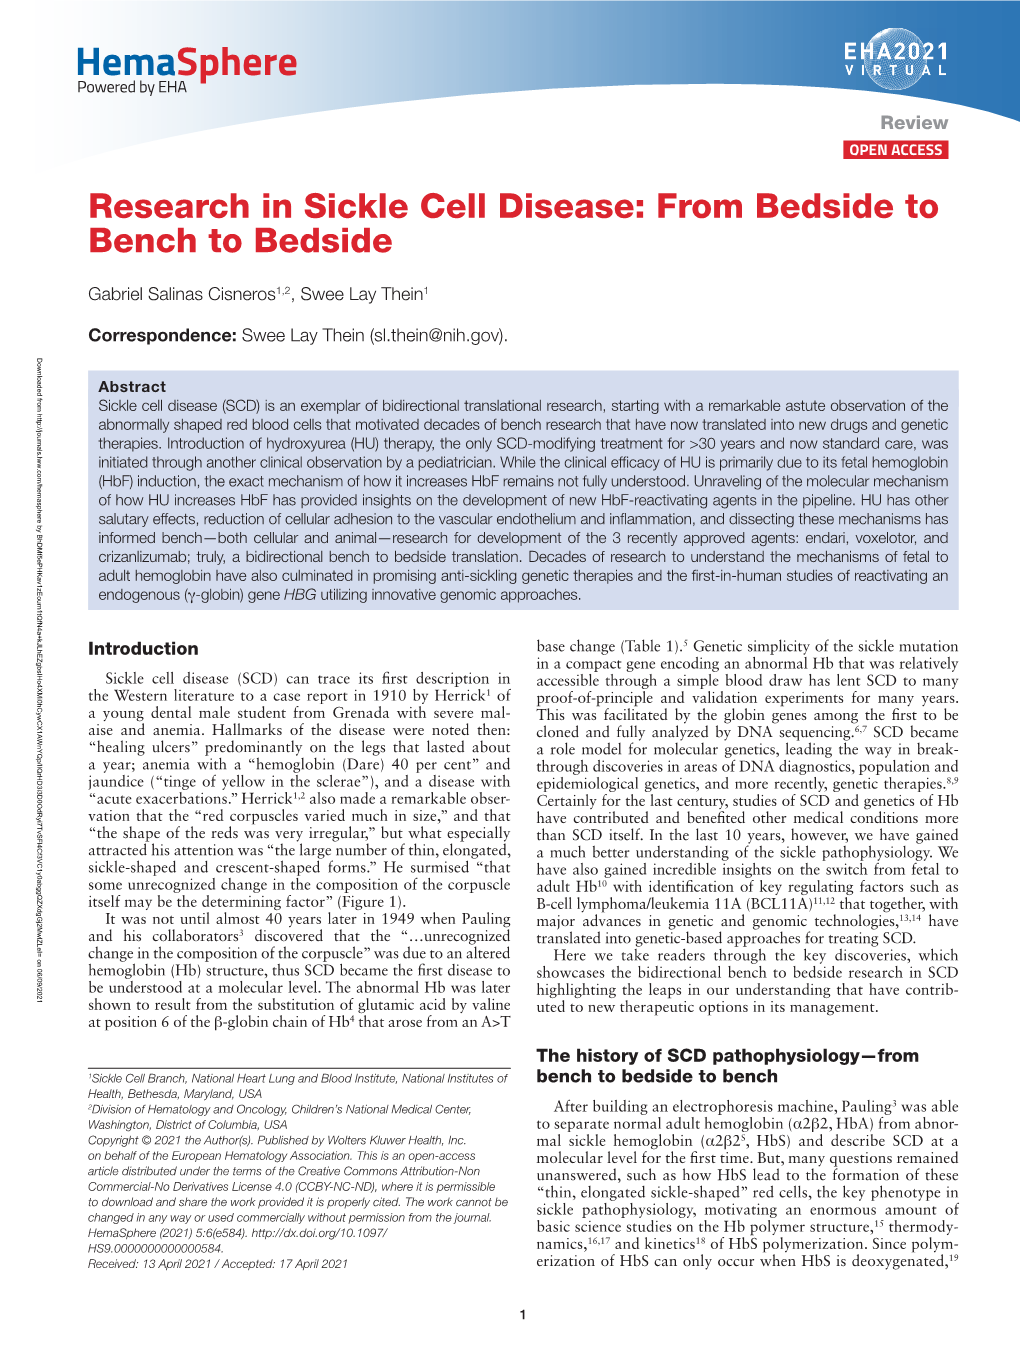 Research in Sickle Cell Disease